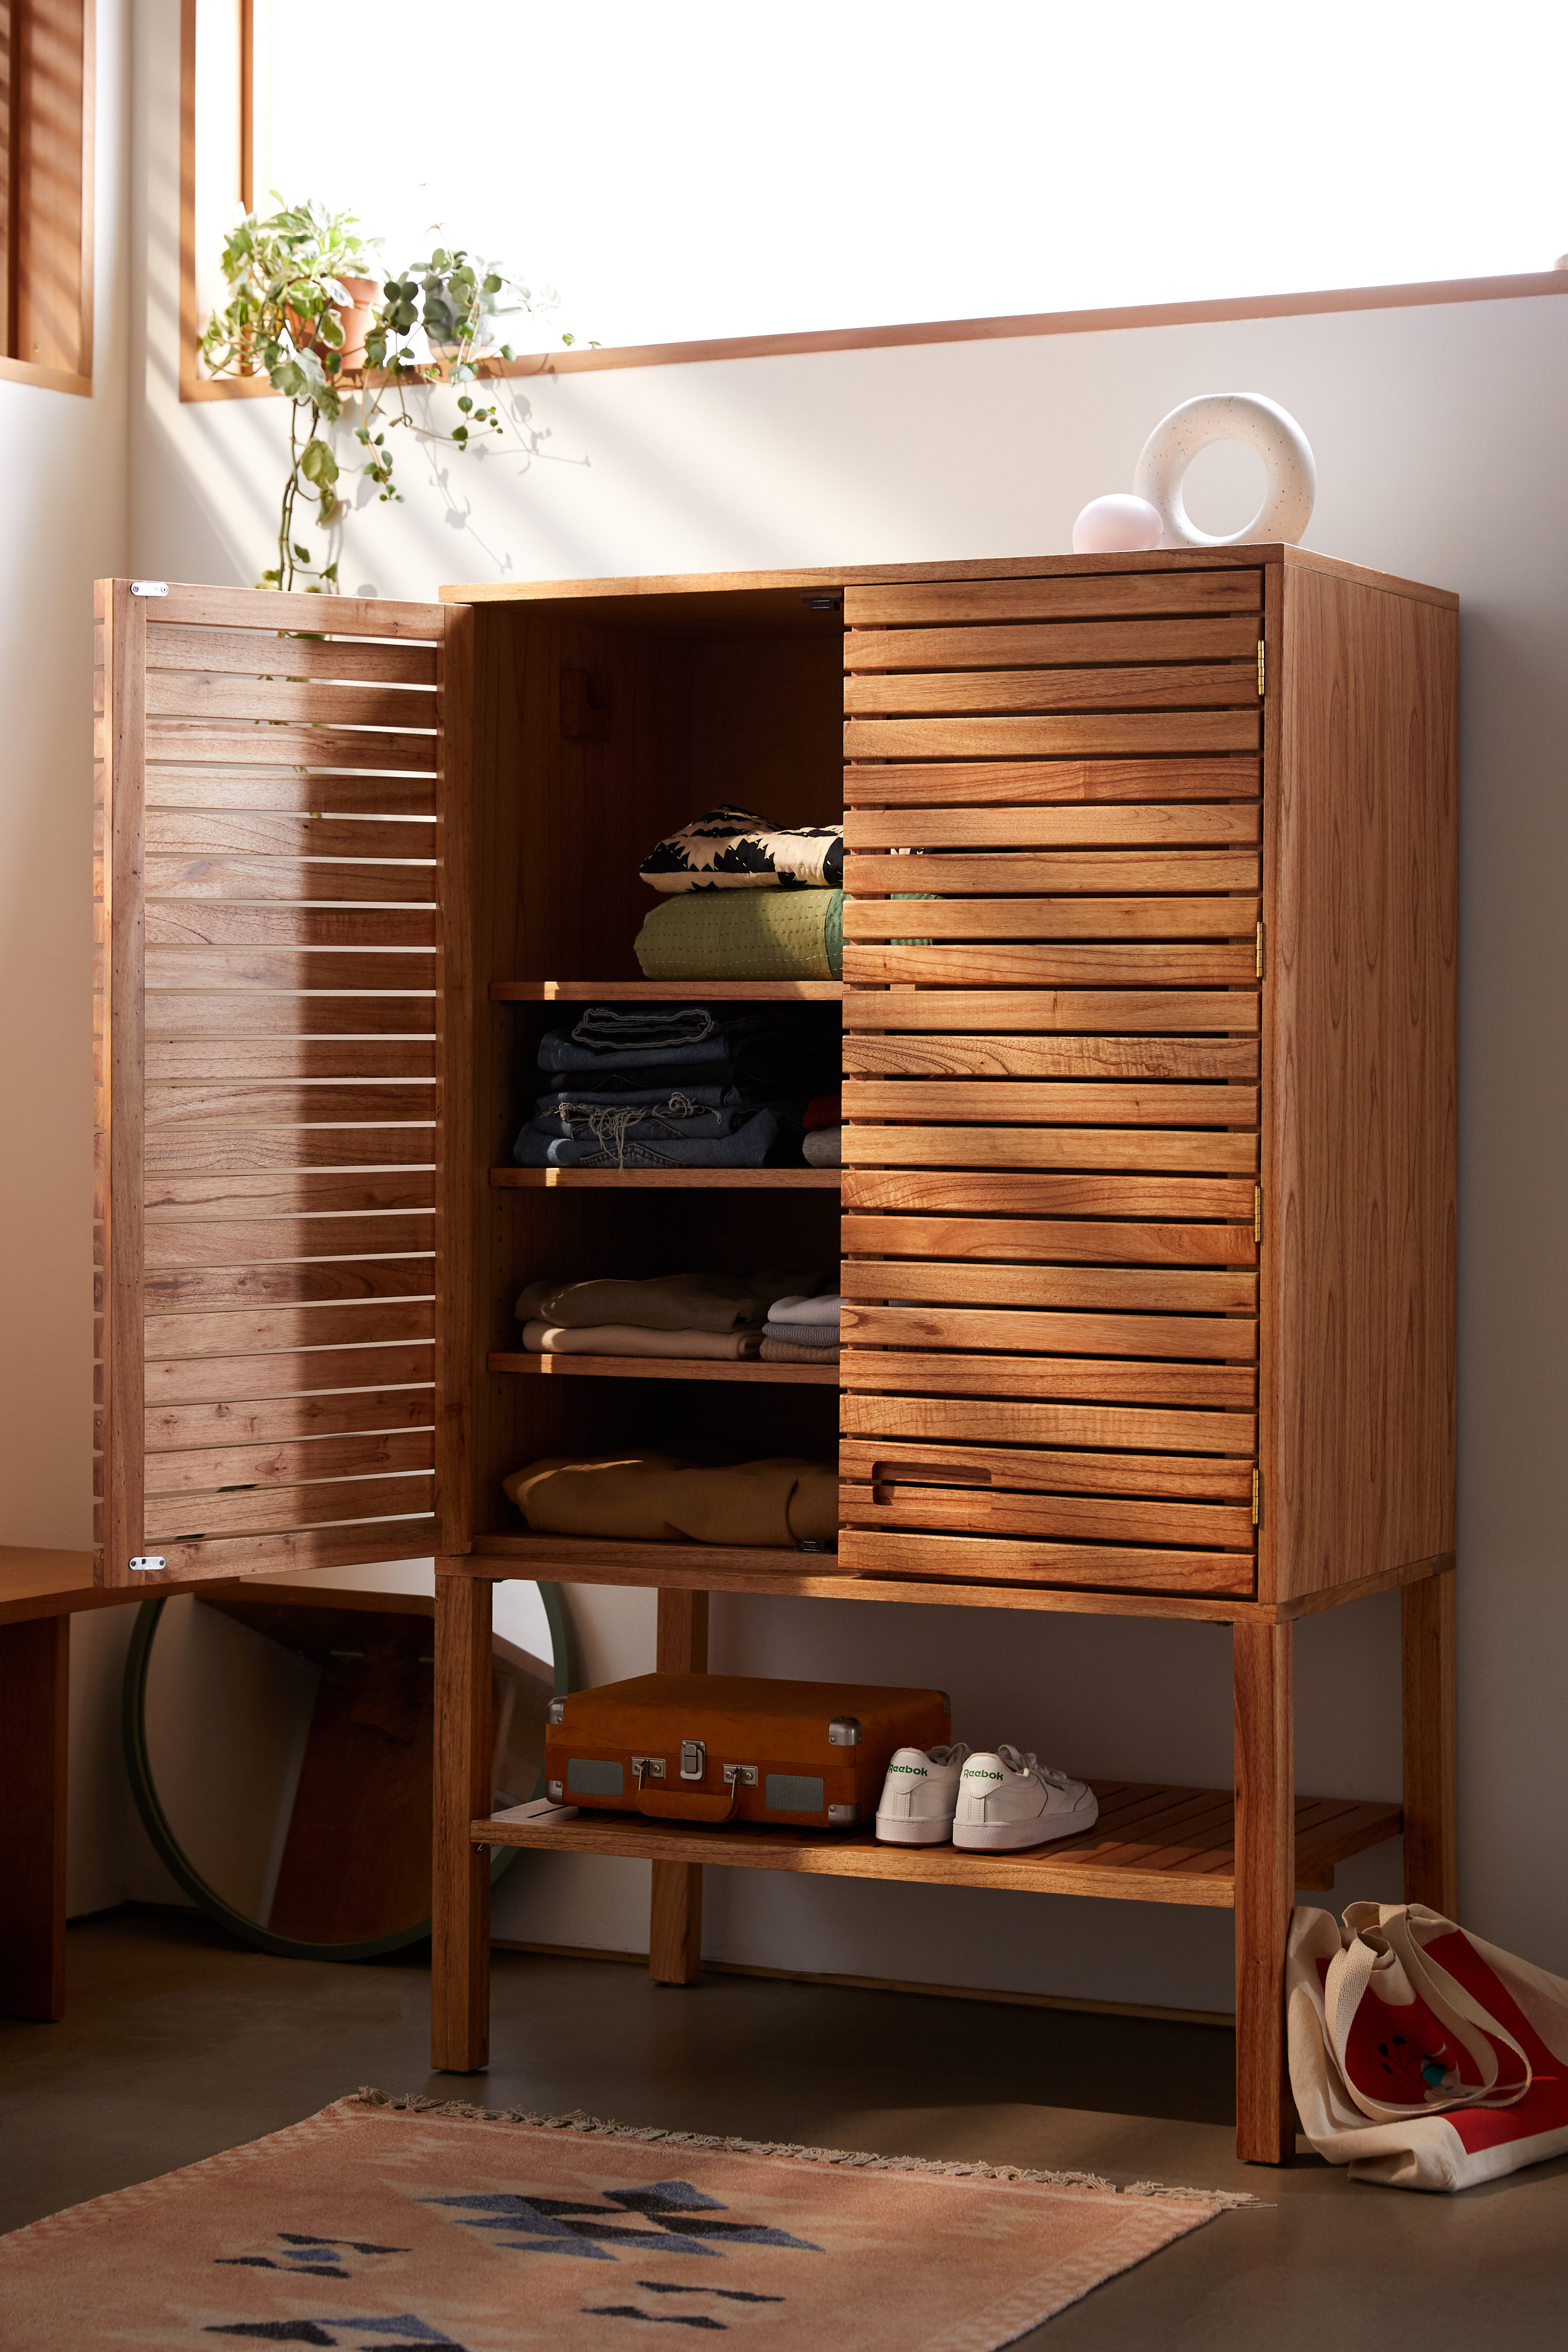 A slatted wood armoire with one door open and shoes on a bottom shelf